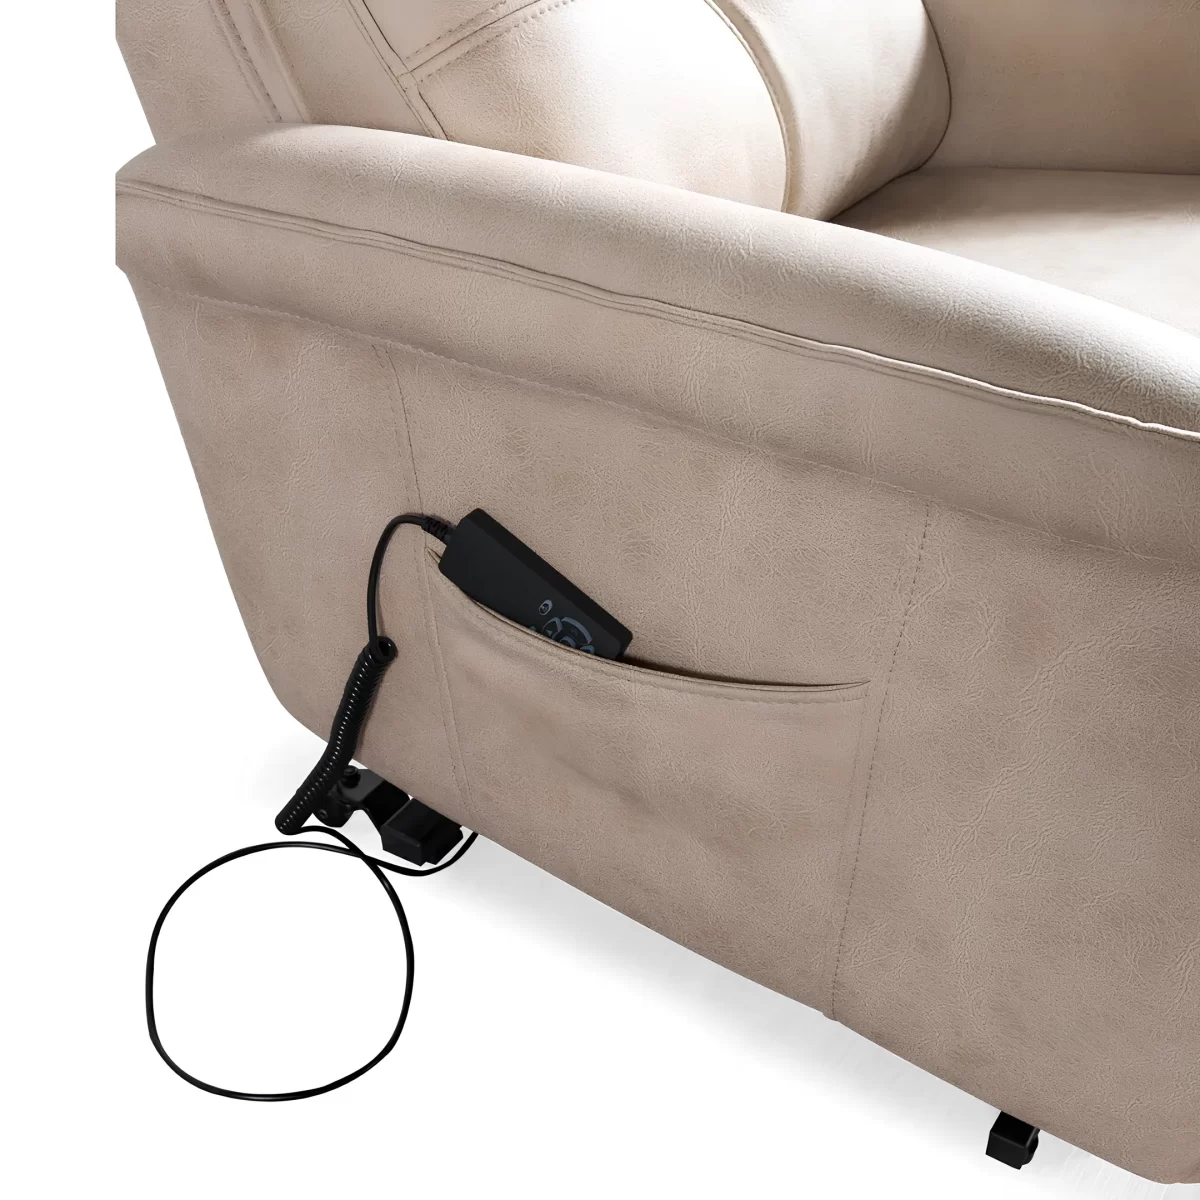 tetra reclining sofa lift for patience chair for hospital3